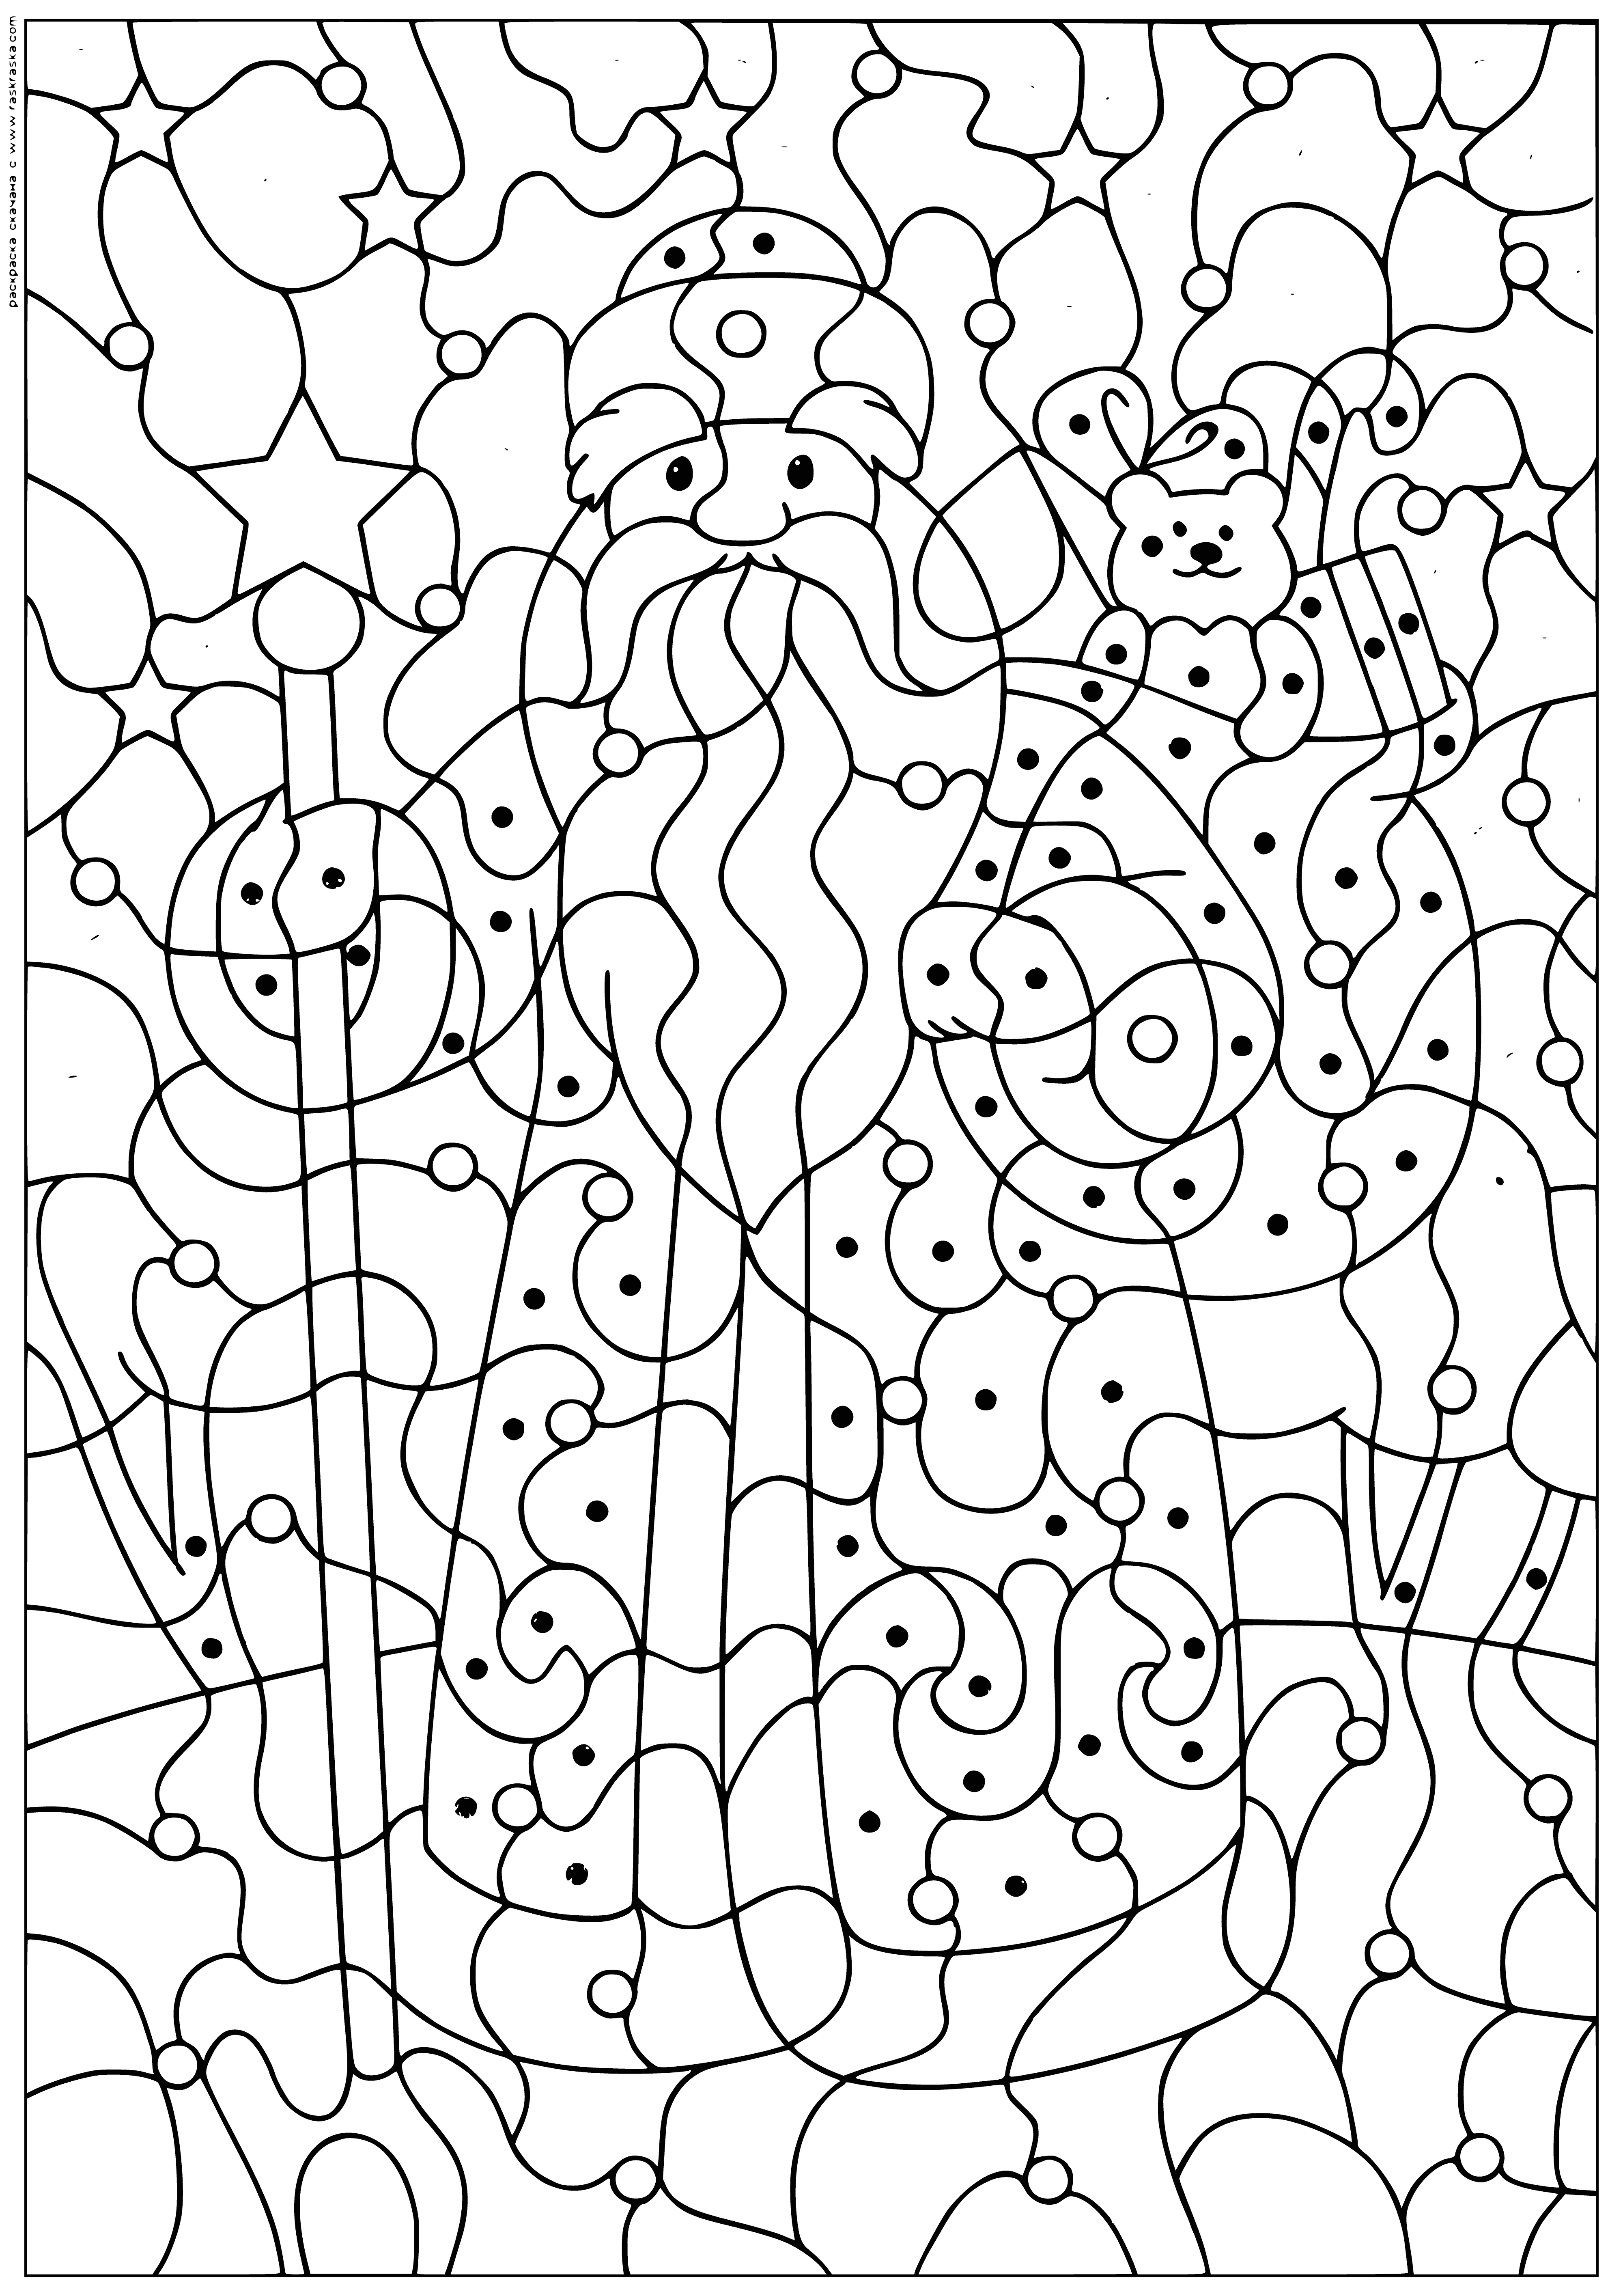 coloring page: Santa stands in front of a fireplace, holding a candy cane and presents. Christmas tree decorated with red, white, and gold, stands in the corner.